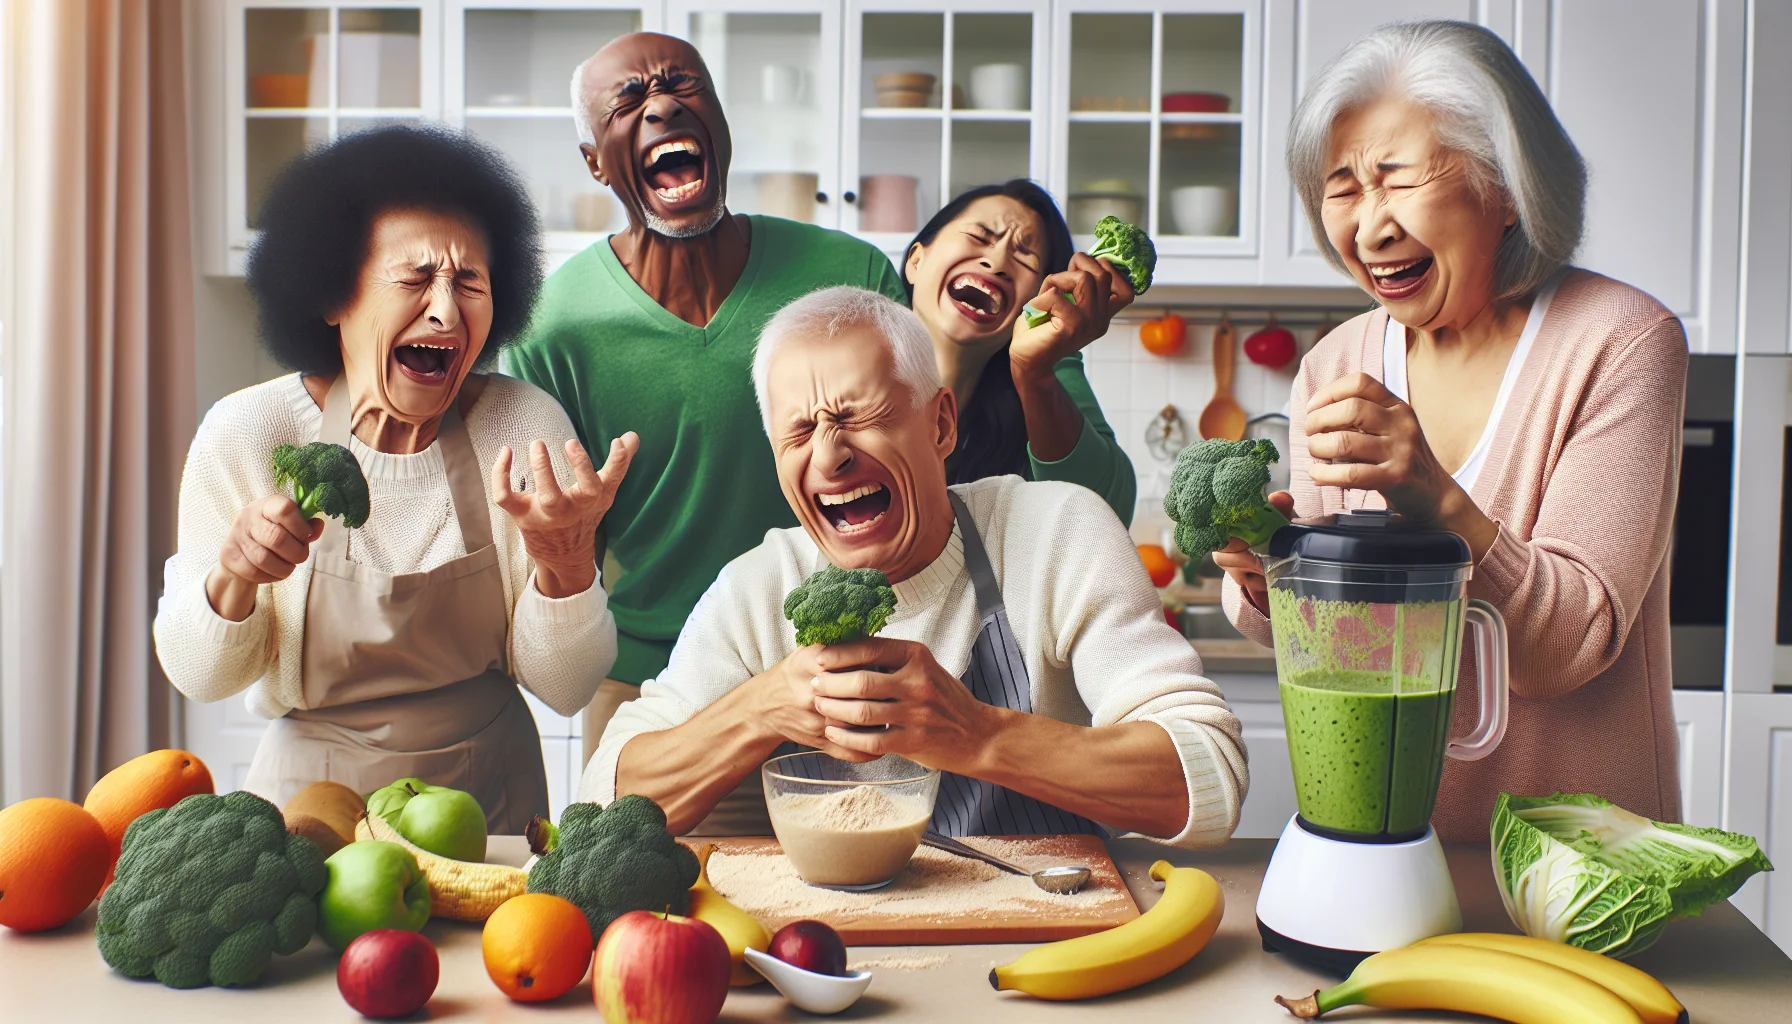 Create an amusing, realistic image of seniors engaging with their post-heart attack diets in a creative and humorous way. One older Hispanic man struggling to eat broccoli, a senior Caucasian woman having fun while blending a nutrient dense green smoothie, an elderly Black man laughing as he measures his brown rice portion, and an Asian senior woman happily peeling fruits. Everyone is in a well-lit and colorful kitchen environment filled with healthy food items, suggesting a shared commitment to a heart-healthy lifestyle.